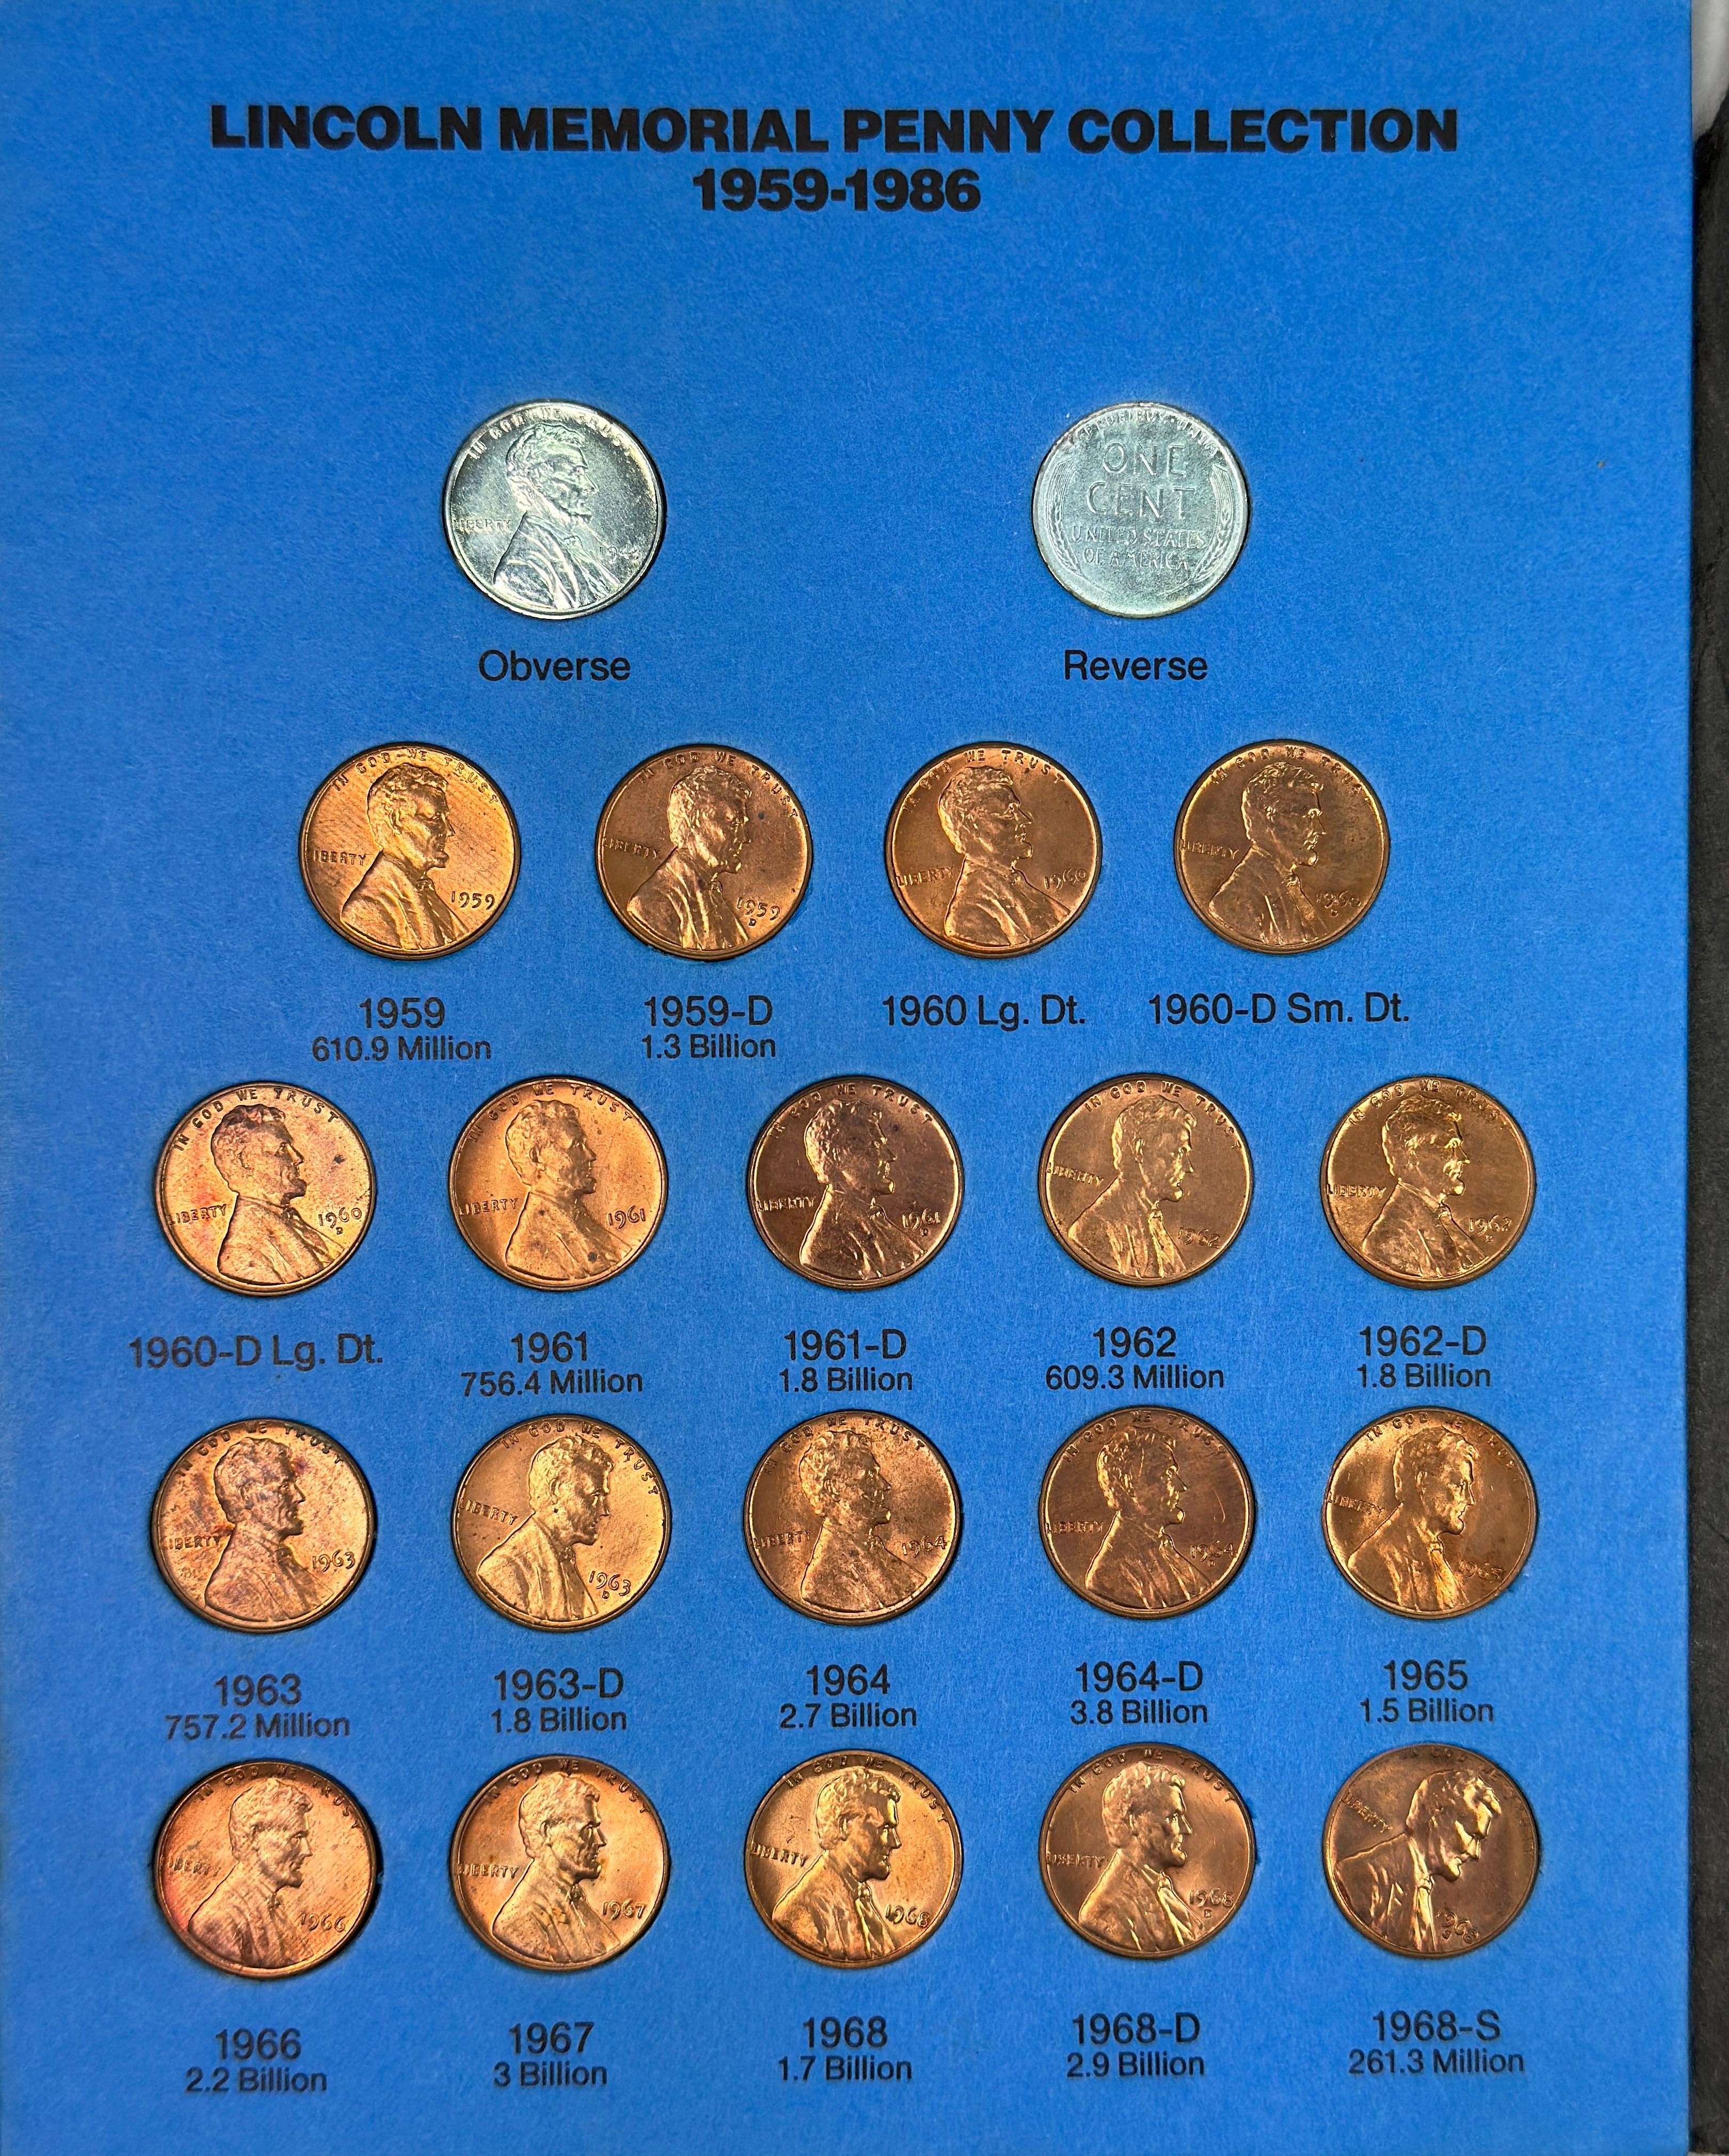 Complete 57-piece set of uncirculated 1959-1986 U.S. Lincoln cents